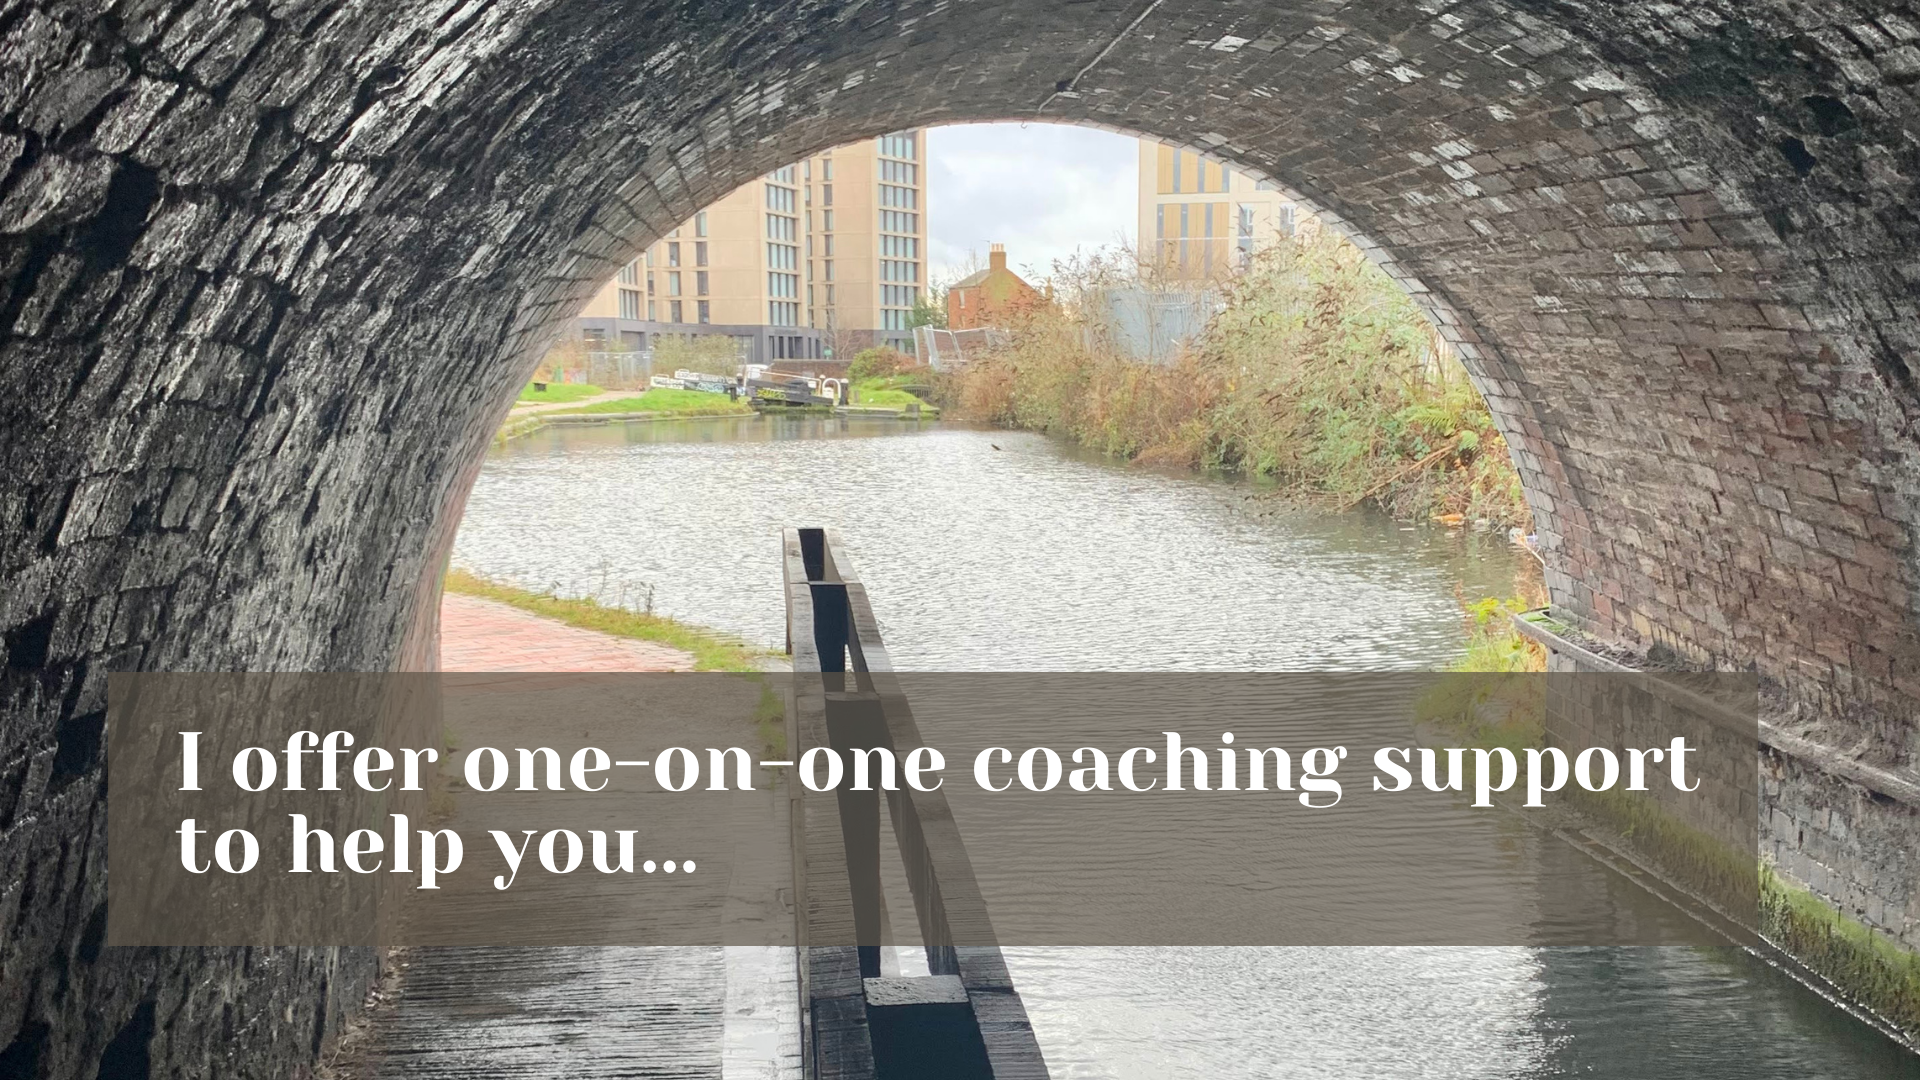 view through canal tunnel with text:"I offer one-to-one coaching support to help you..."